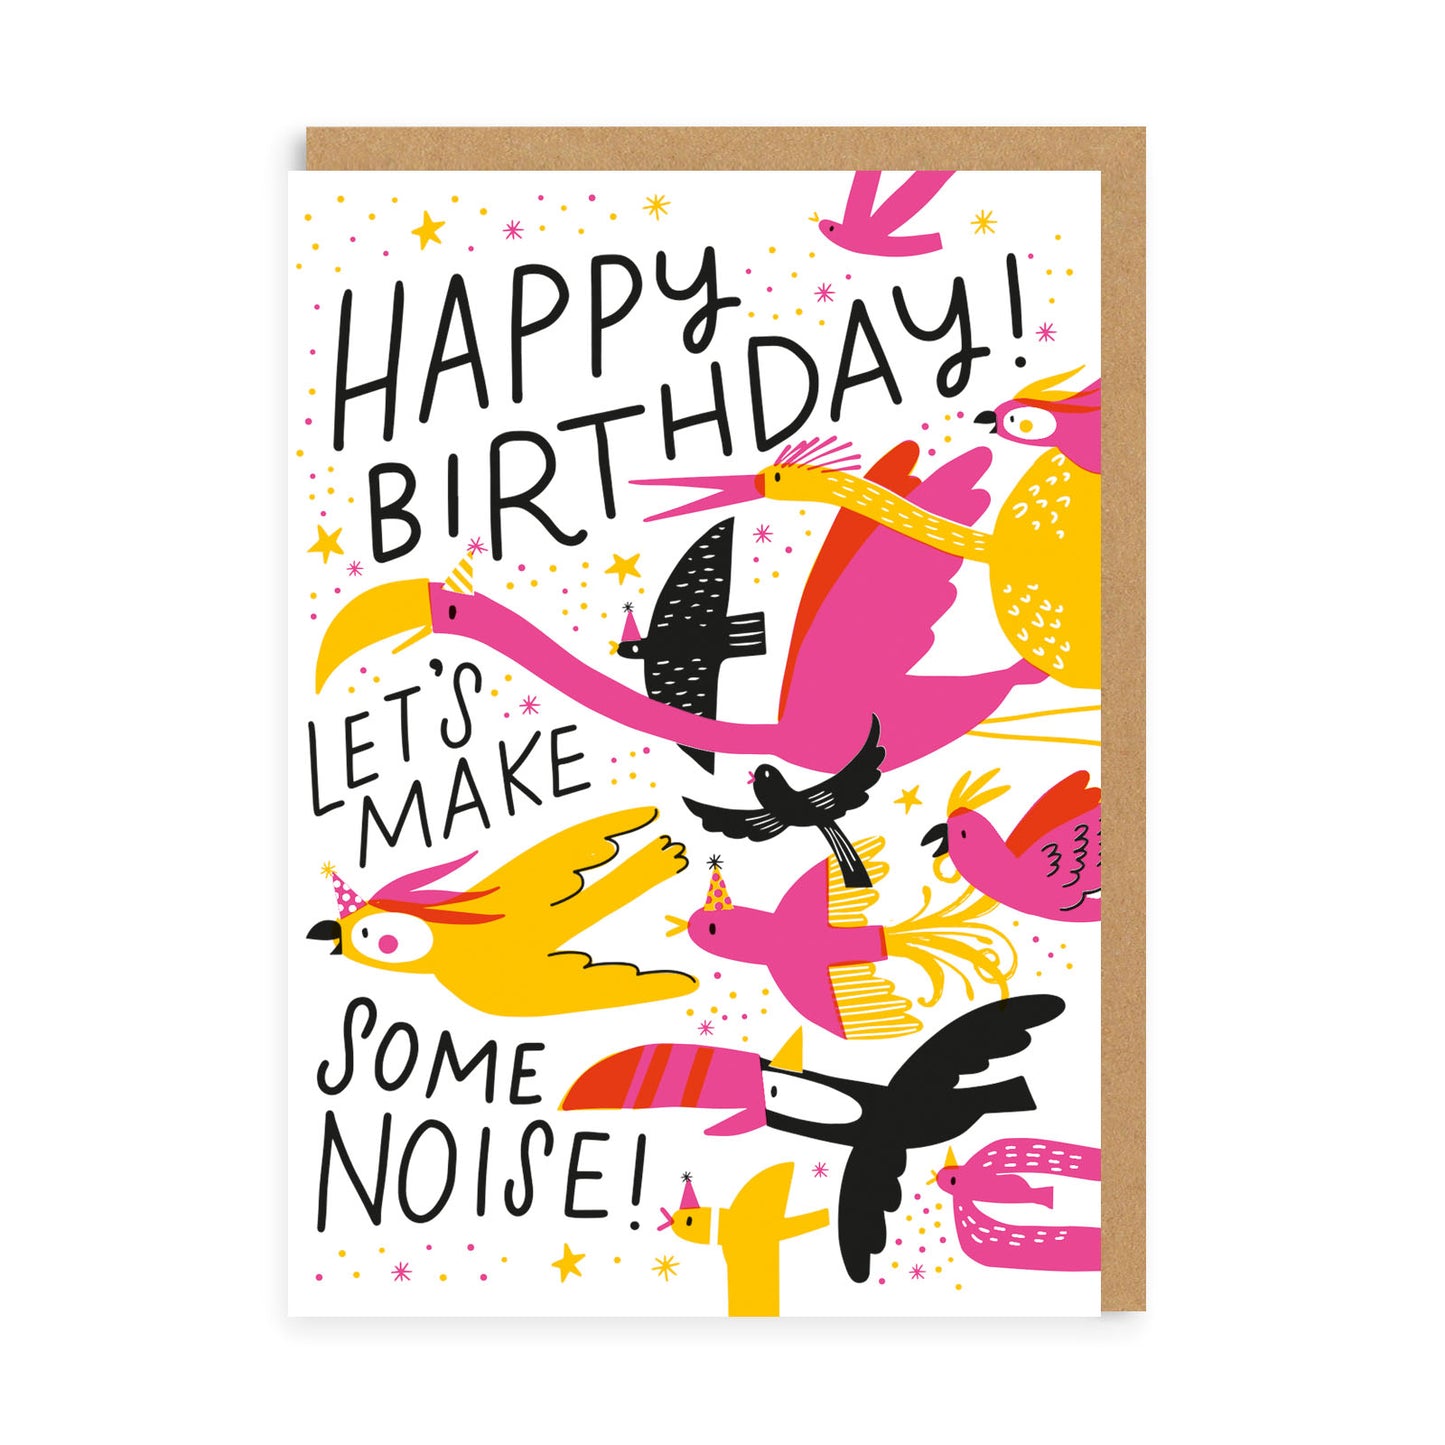 Let's Make Some Noise Greeting Card